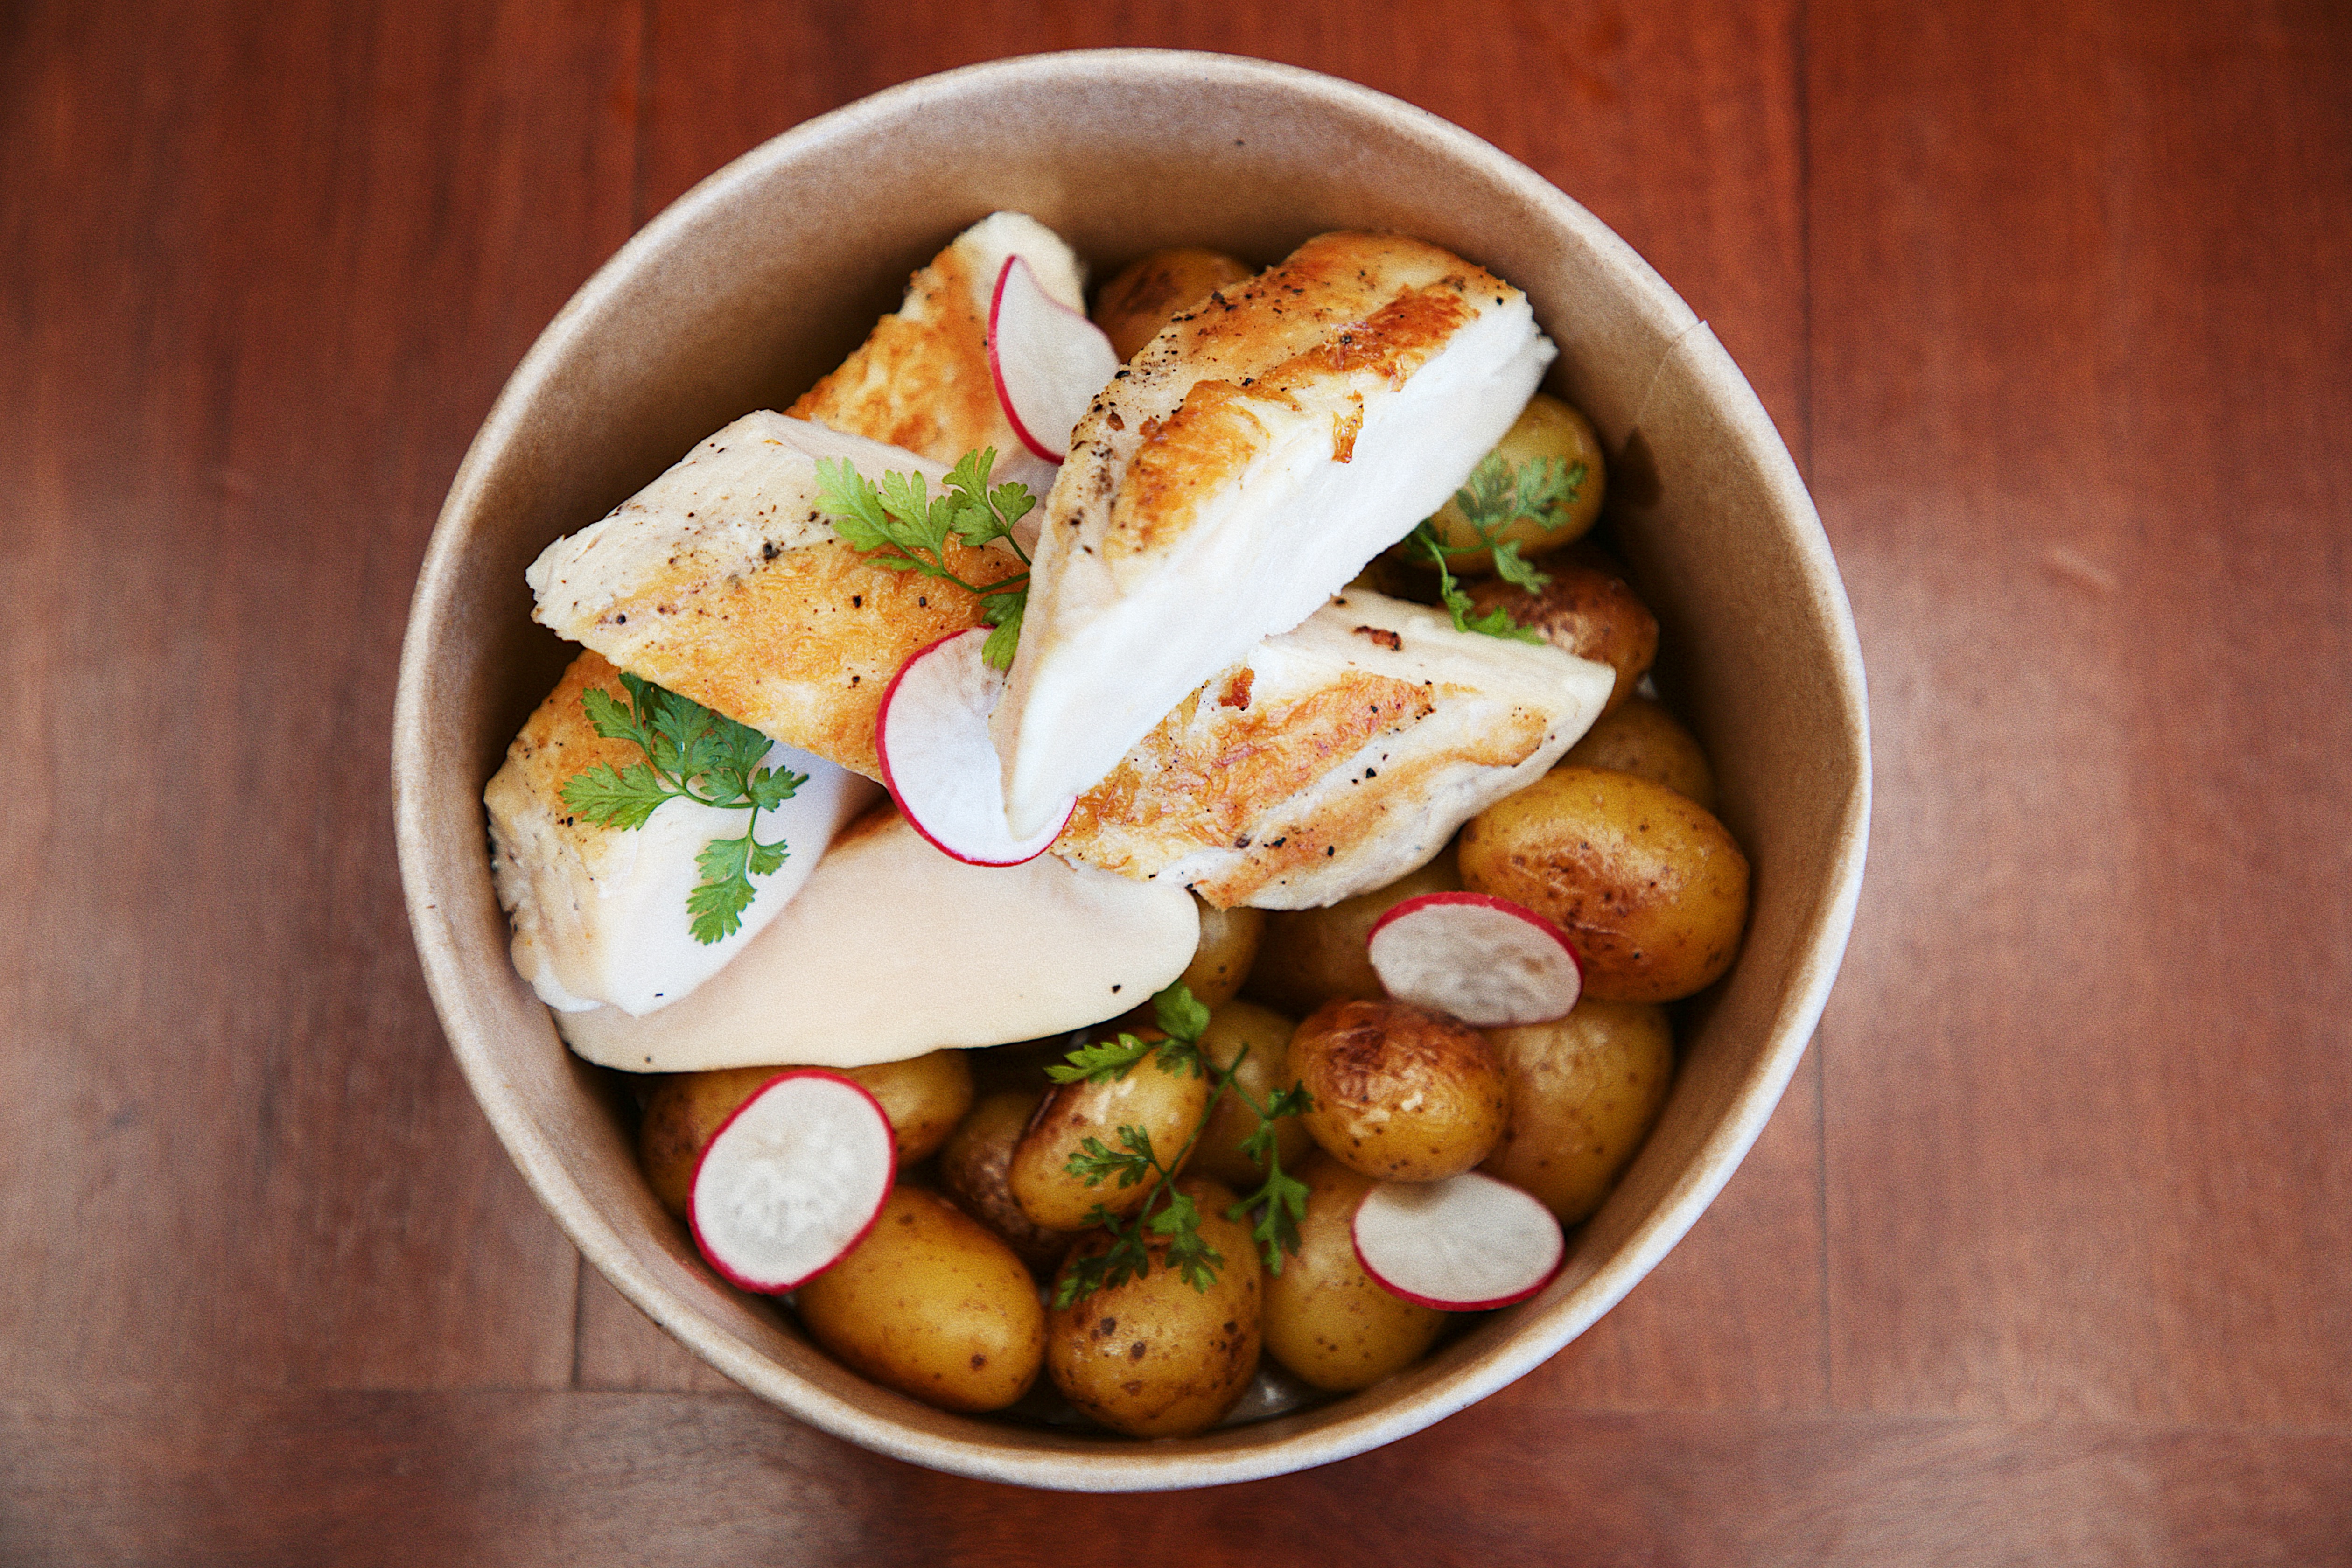 Chicken breast, roasted potatoes 